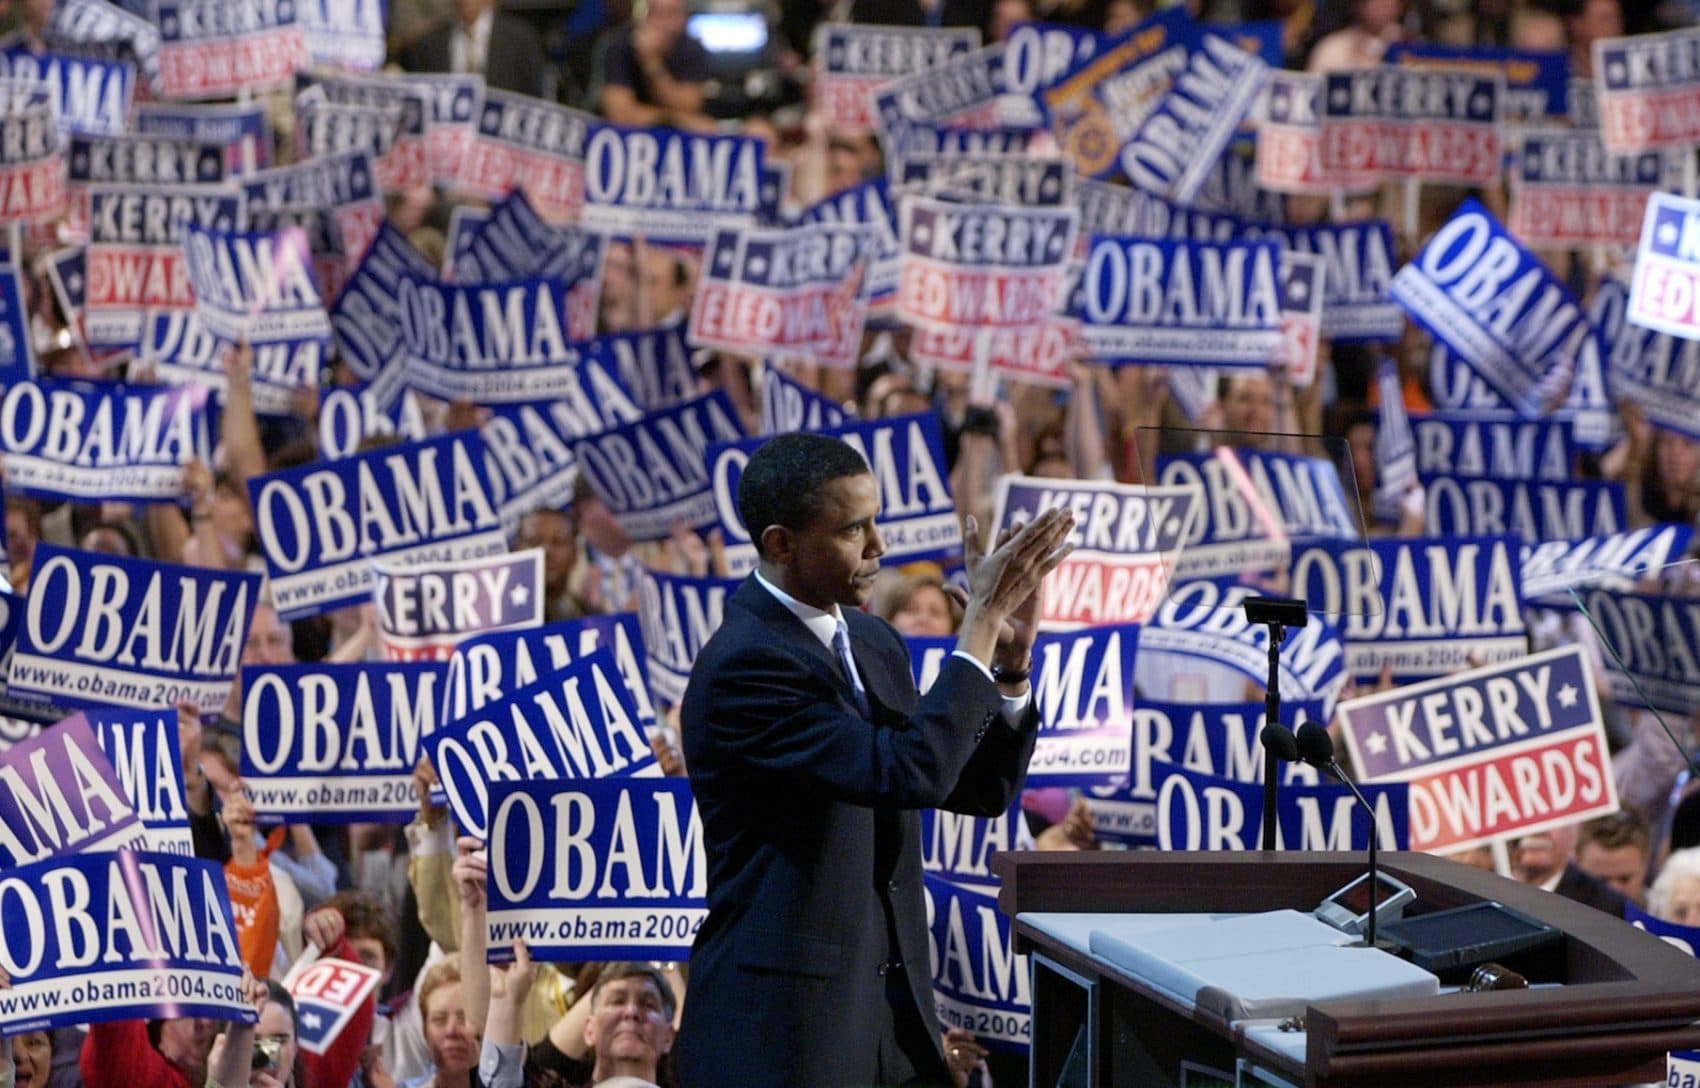 Barack Obama, then-candidate for the Senate from Illinois, speaks to delegates during the Democratic National Convention at the FleetCenter in Boston on July 27, 2004. (Charlie Neibergall/AP)